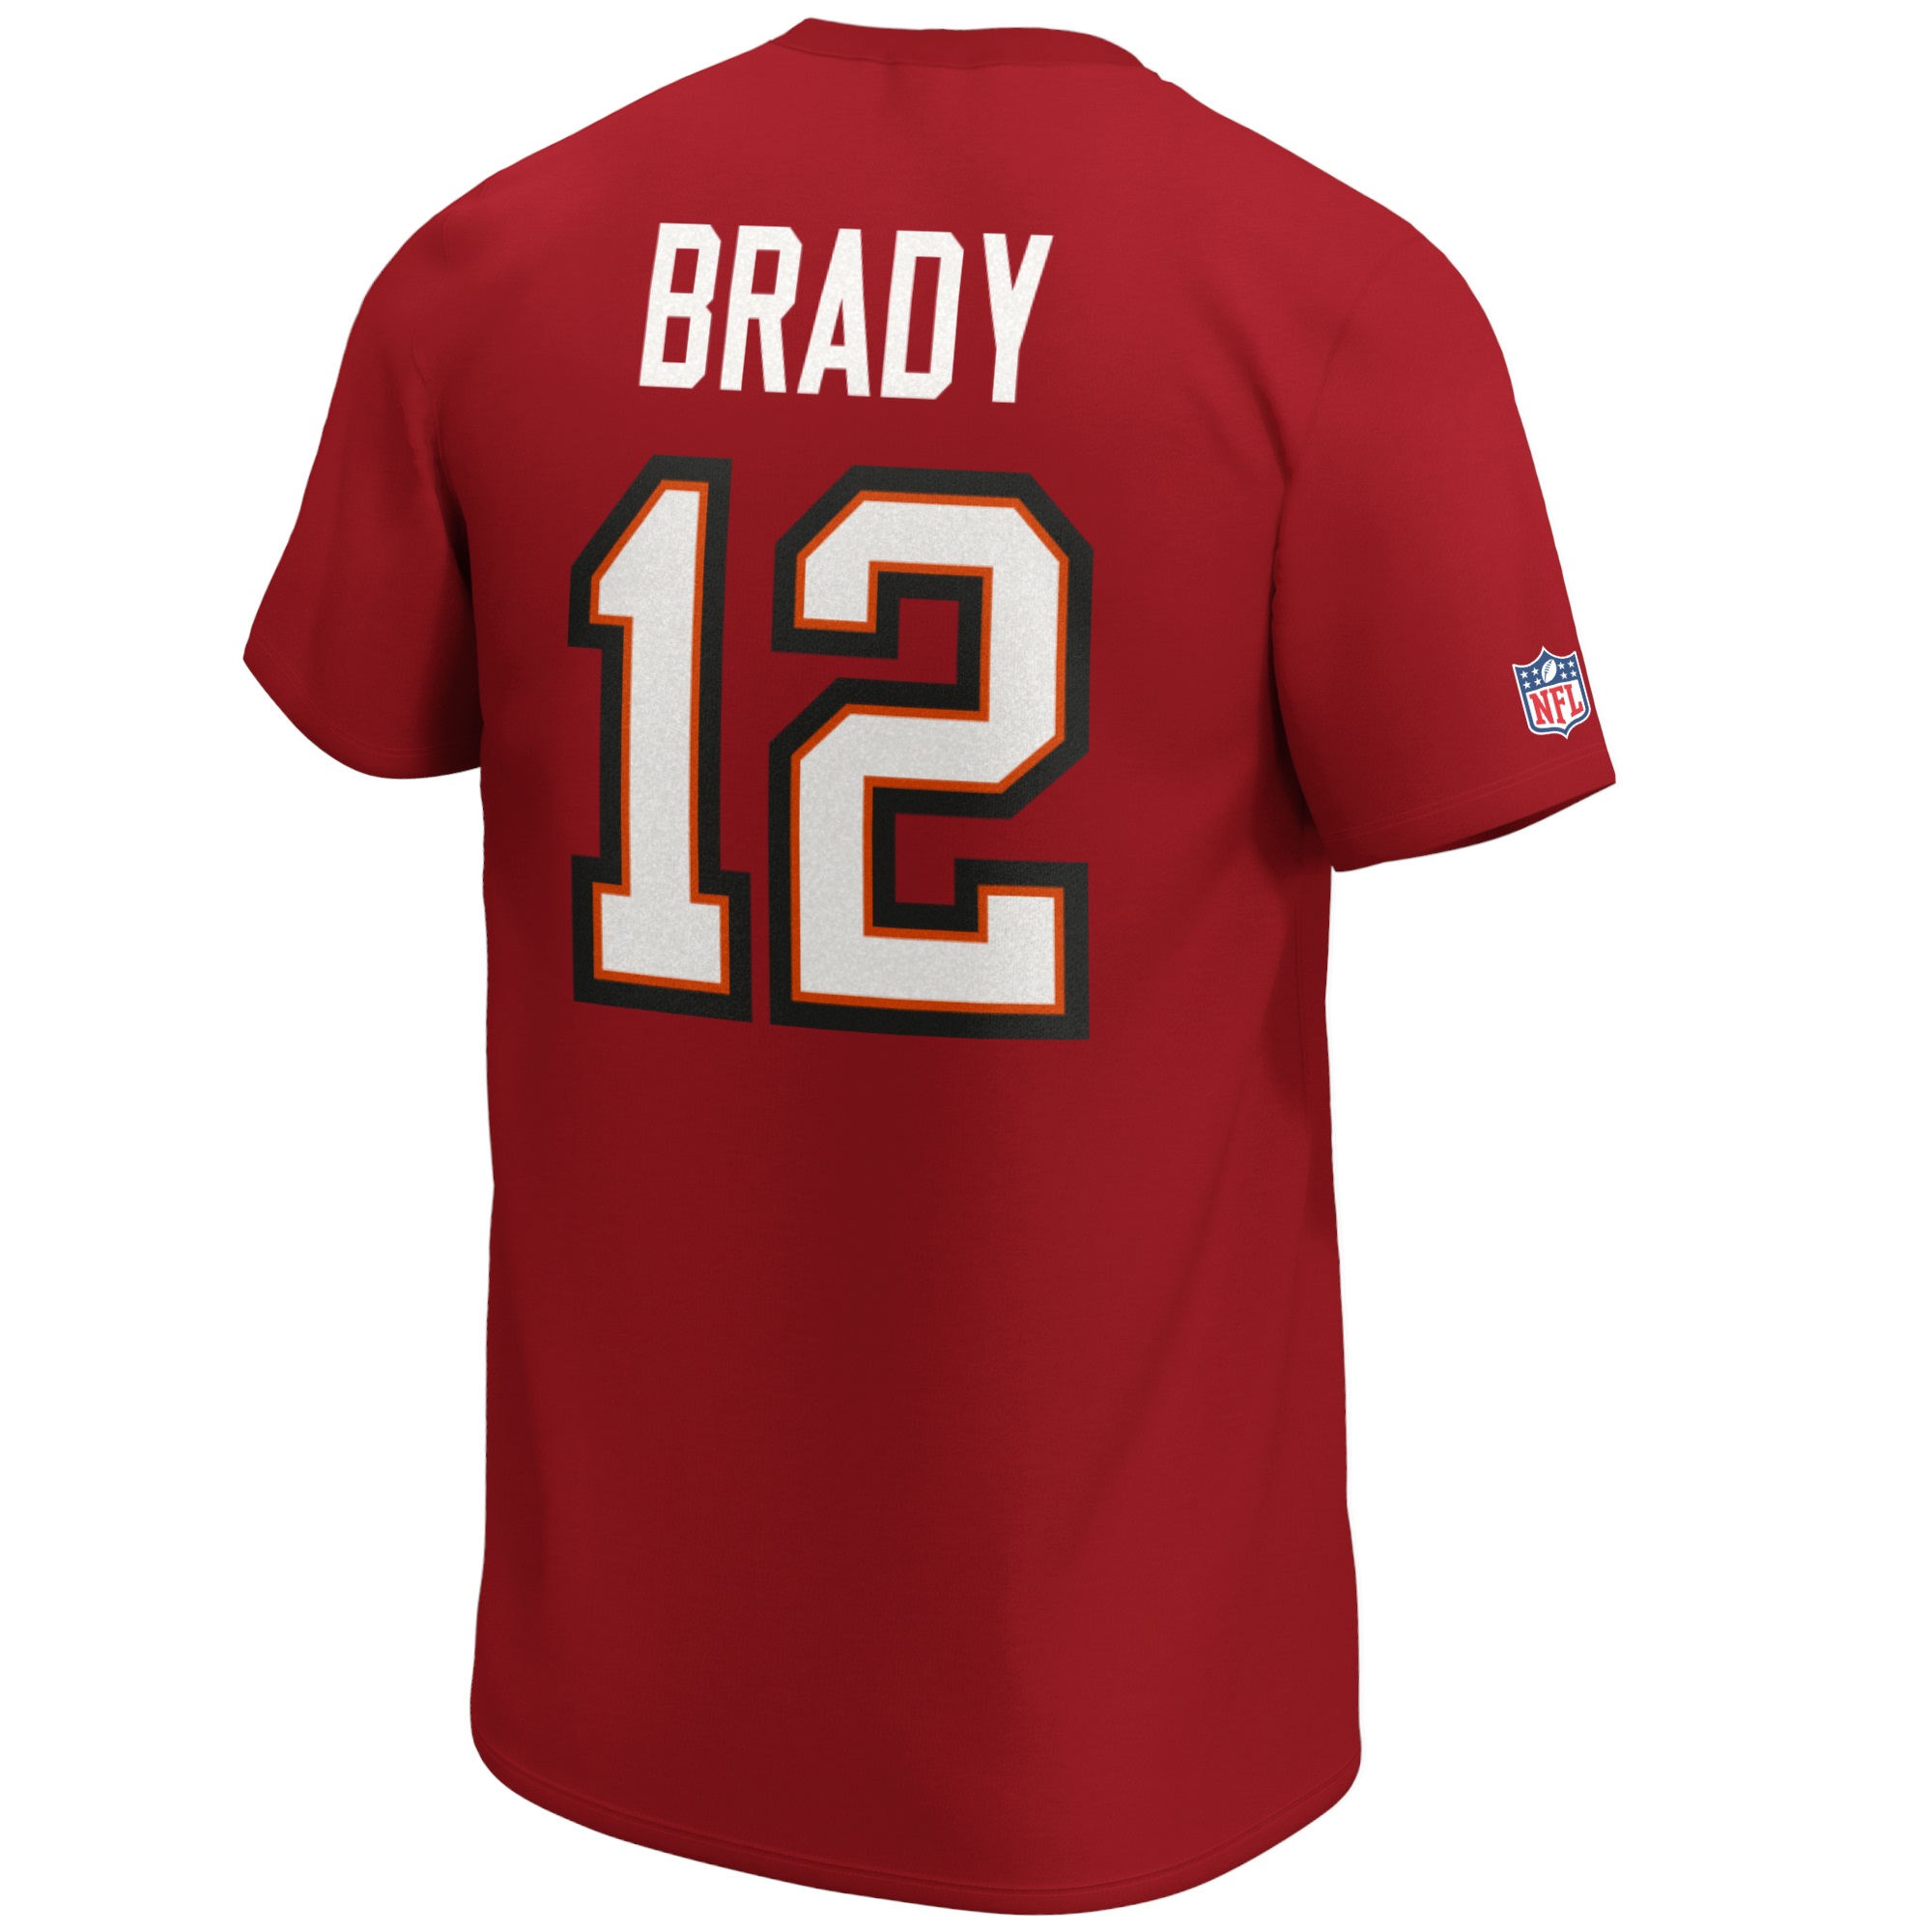 Tom Brady #12 Tampa Bay Buccaneers Iconic Name and Number Graphic T-Shirt Fanatics